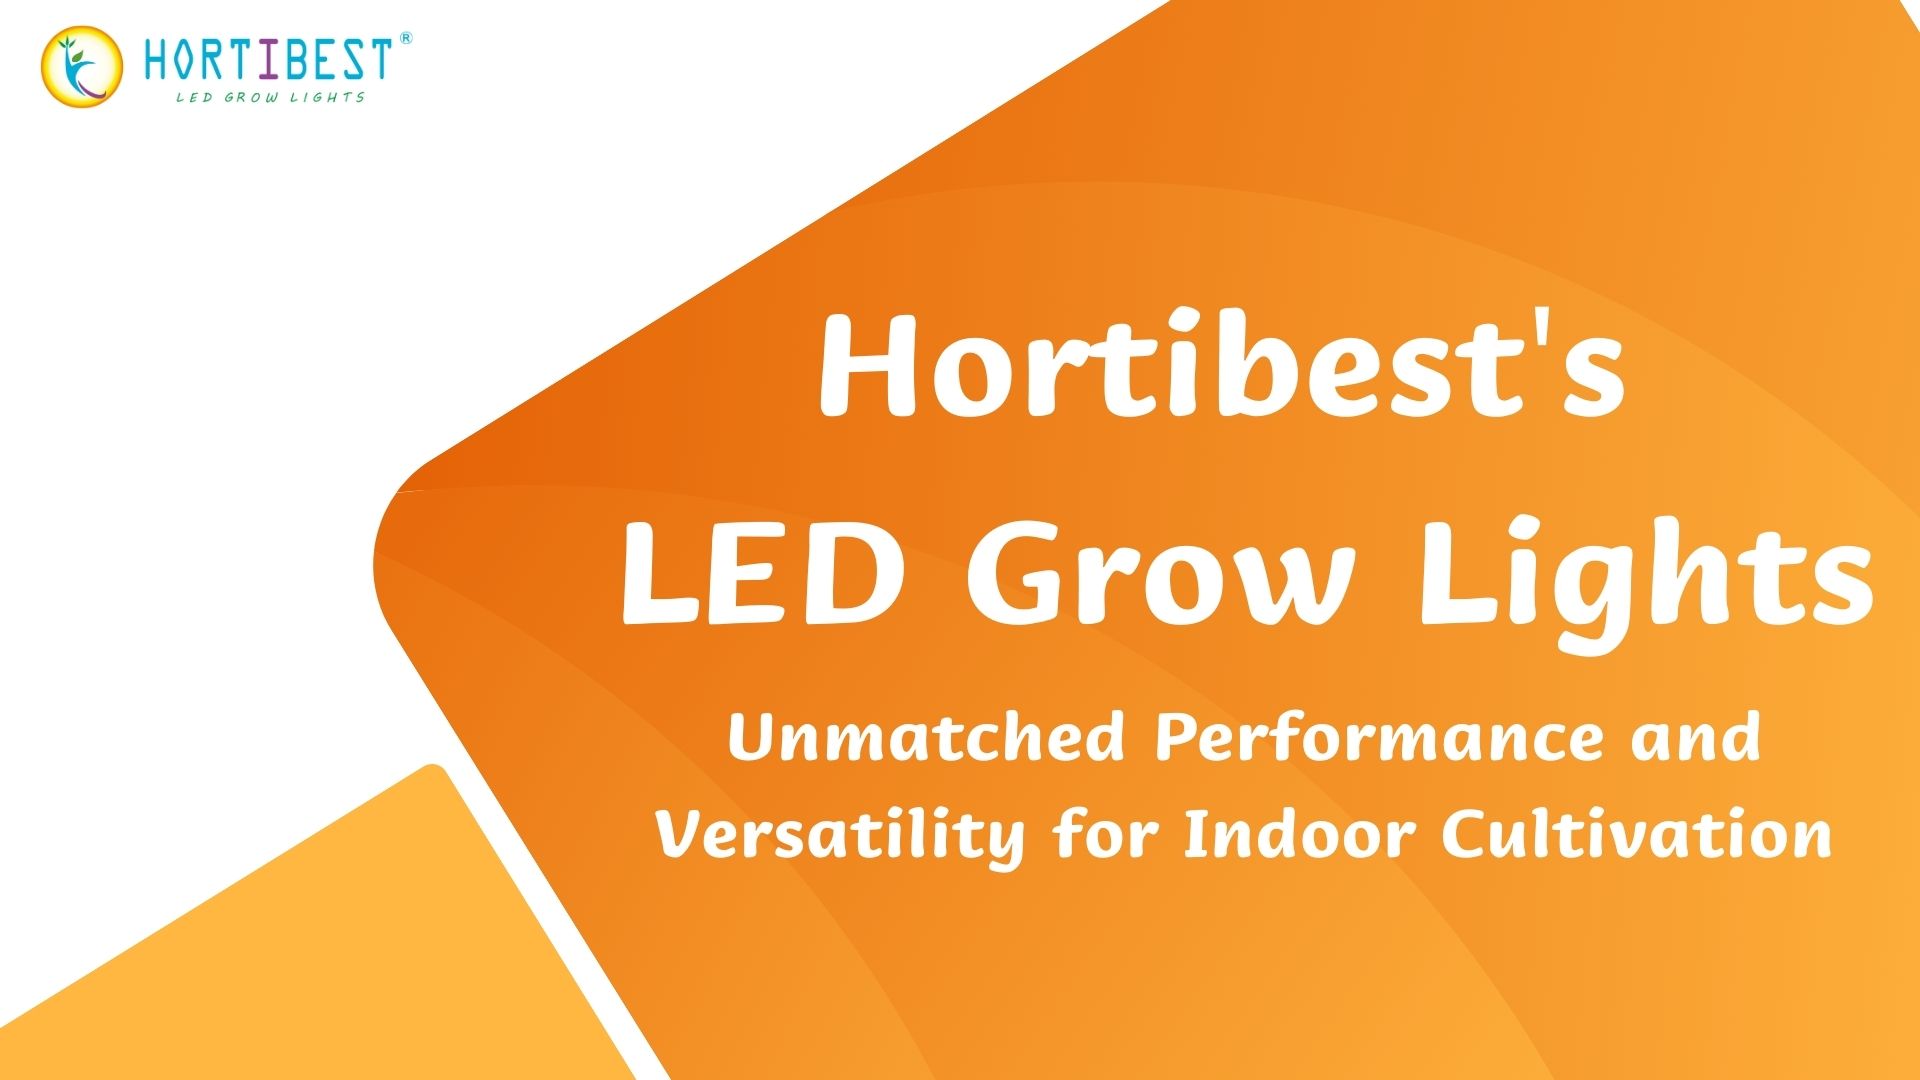 Hortibest's LED Grow Lights: Unmatched Performance and Versatility for Indoor Cultivation!